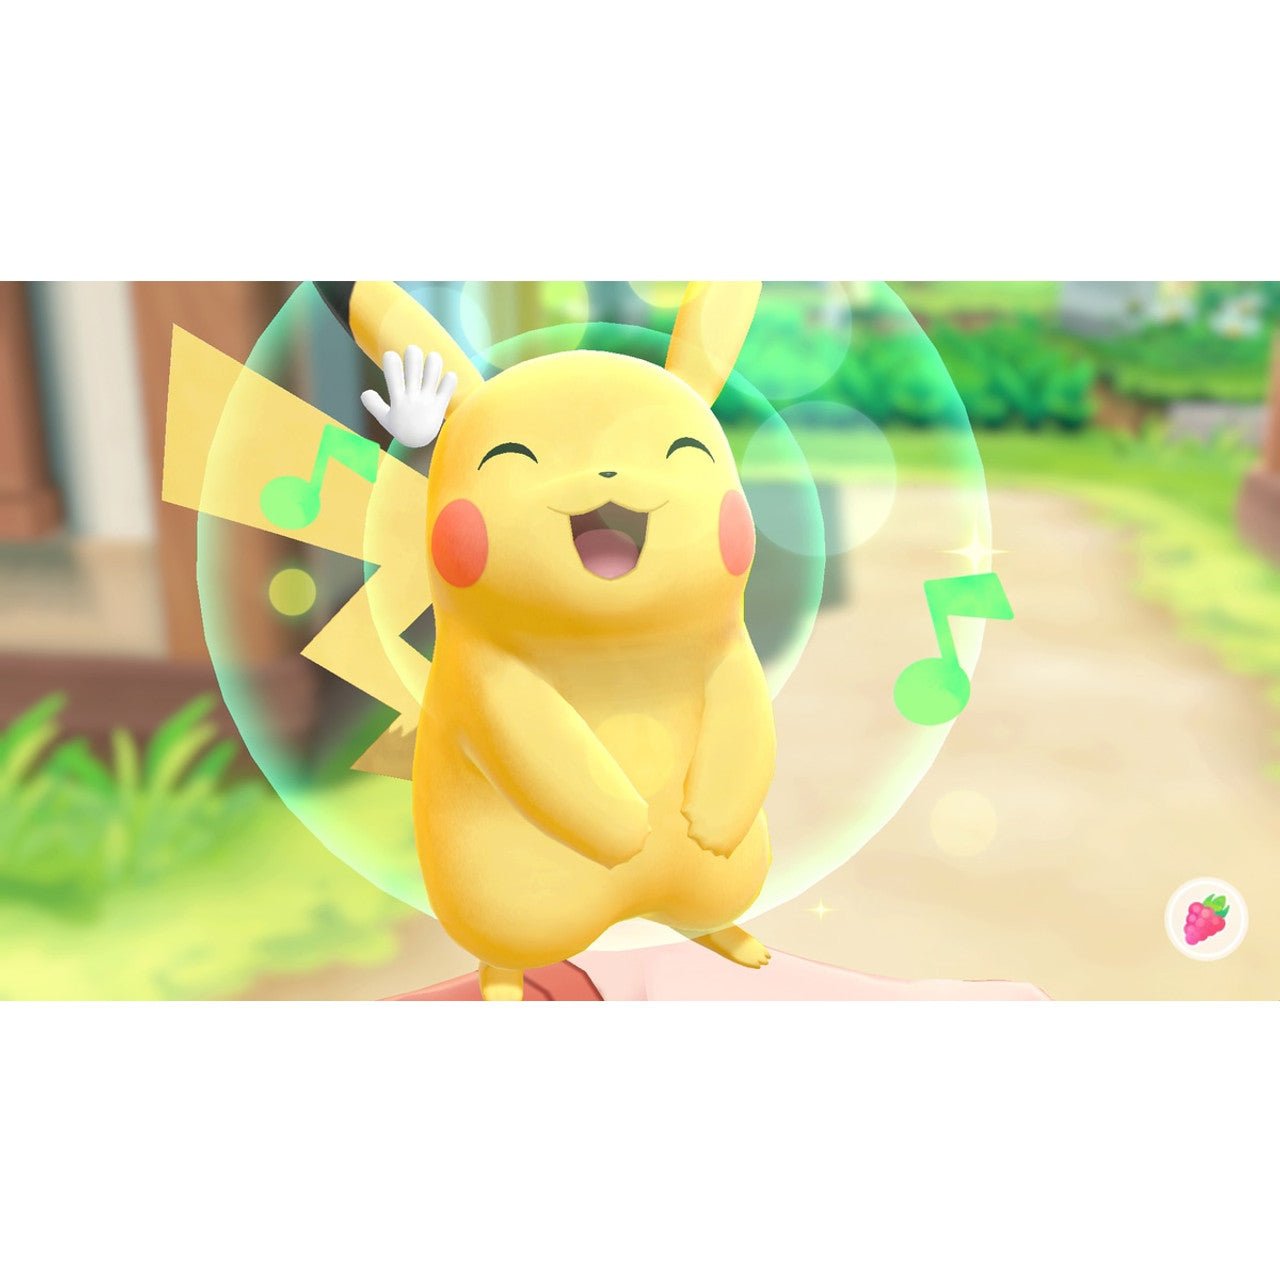 Product Image : This is brand new.<br>Take your Pokémon™ journey to the Kanto region with your energetic partner, Pikachu, to become a top Pokémon Trainer as you battle other trainers. Use a throwing motion to catch Pokémon in the wild with either one Joy-Con™ controller or Poké Ball™ Plus accessory, which will light up, vibrate, and make sounds to bring your adventure to life. Share your adventure with family or friends in 2-player action using a second Joy-Con or Poké Ball Plus (sold separately). You can 